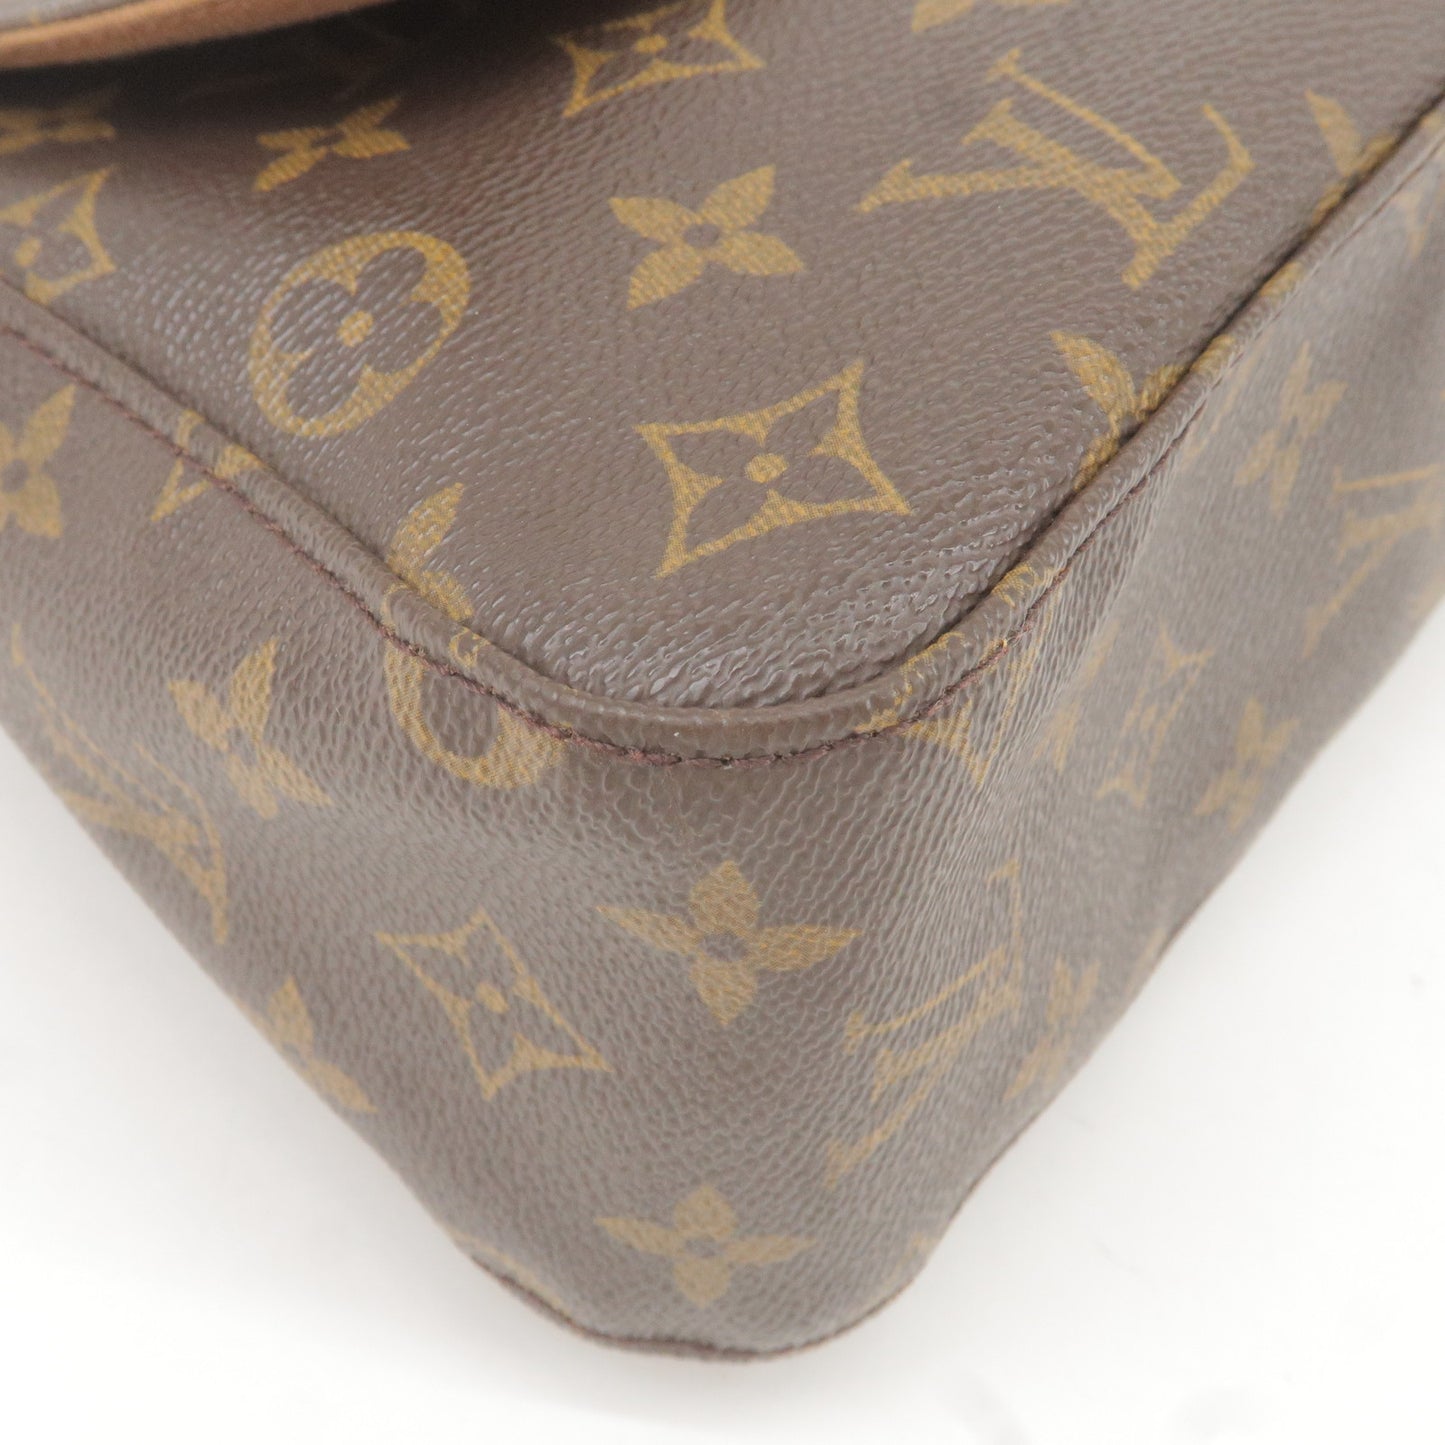 M51147 – Louis Vuitton pre - Vuitton - Looping - Bag - owned 7 Days A Week  bag - Monogram - Mini - Shoulder - Louis Vuitton's New Wave Bags Are  Equal Parts Luxe and Cute - Louis